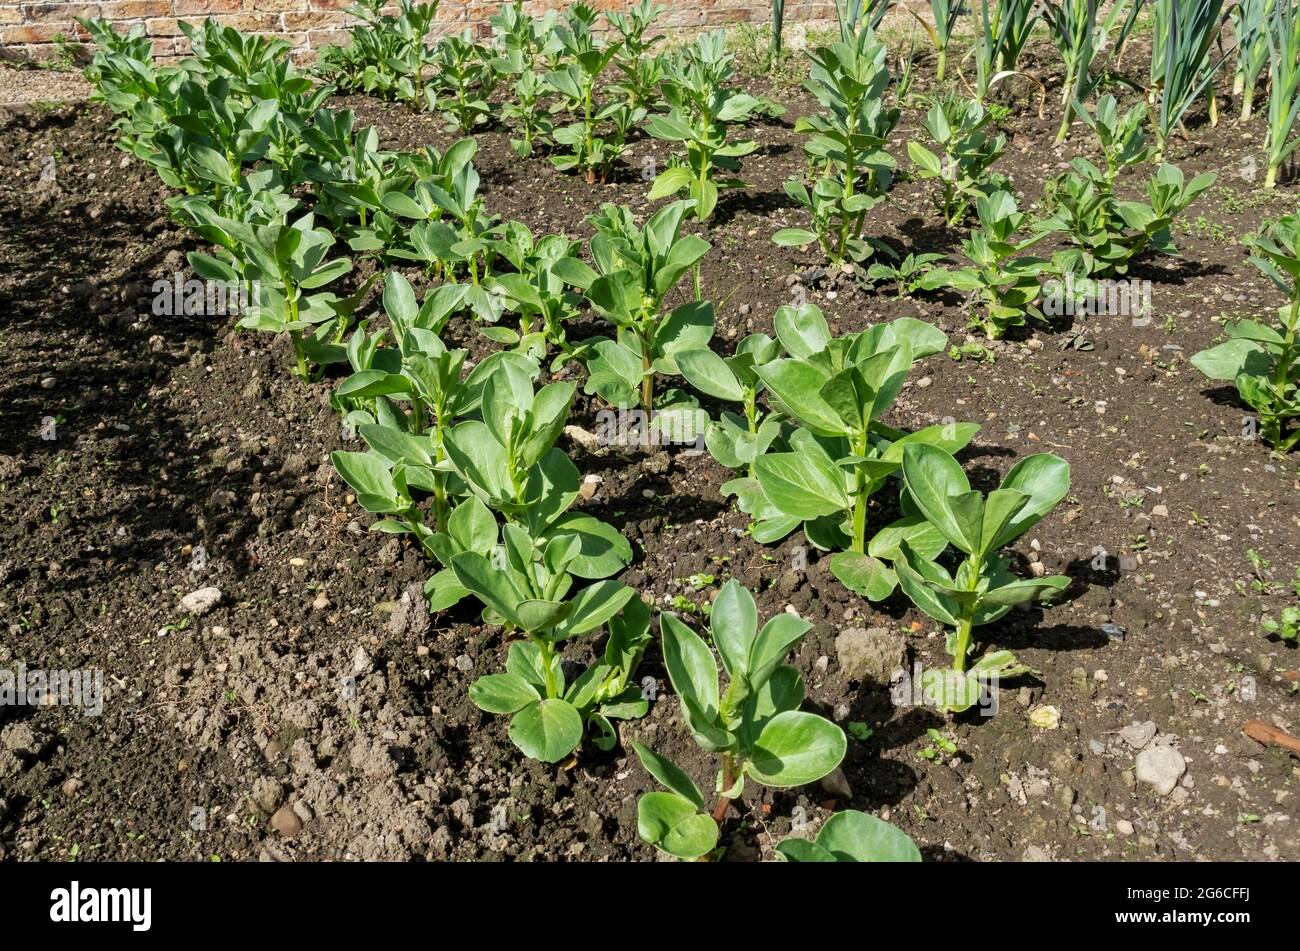 Rows of broad bean plants beans 'Super aquadulce' vegetable growing in the garden in spring England UK United Kingdom GB Great Britain Stock Photo